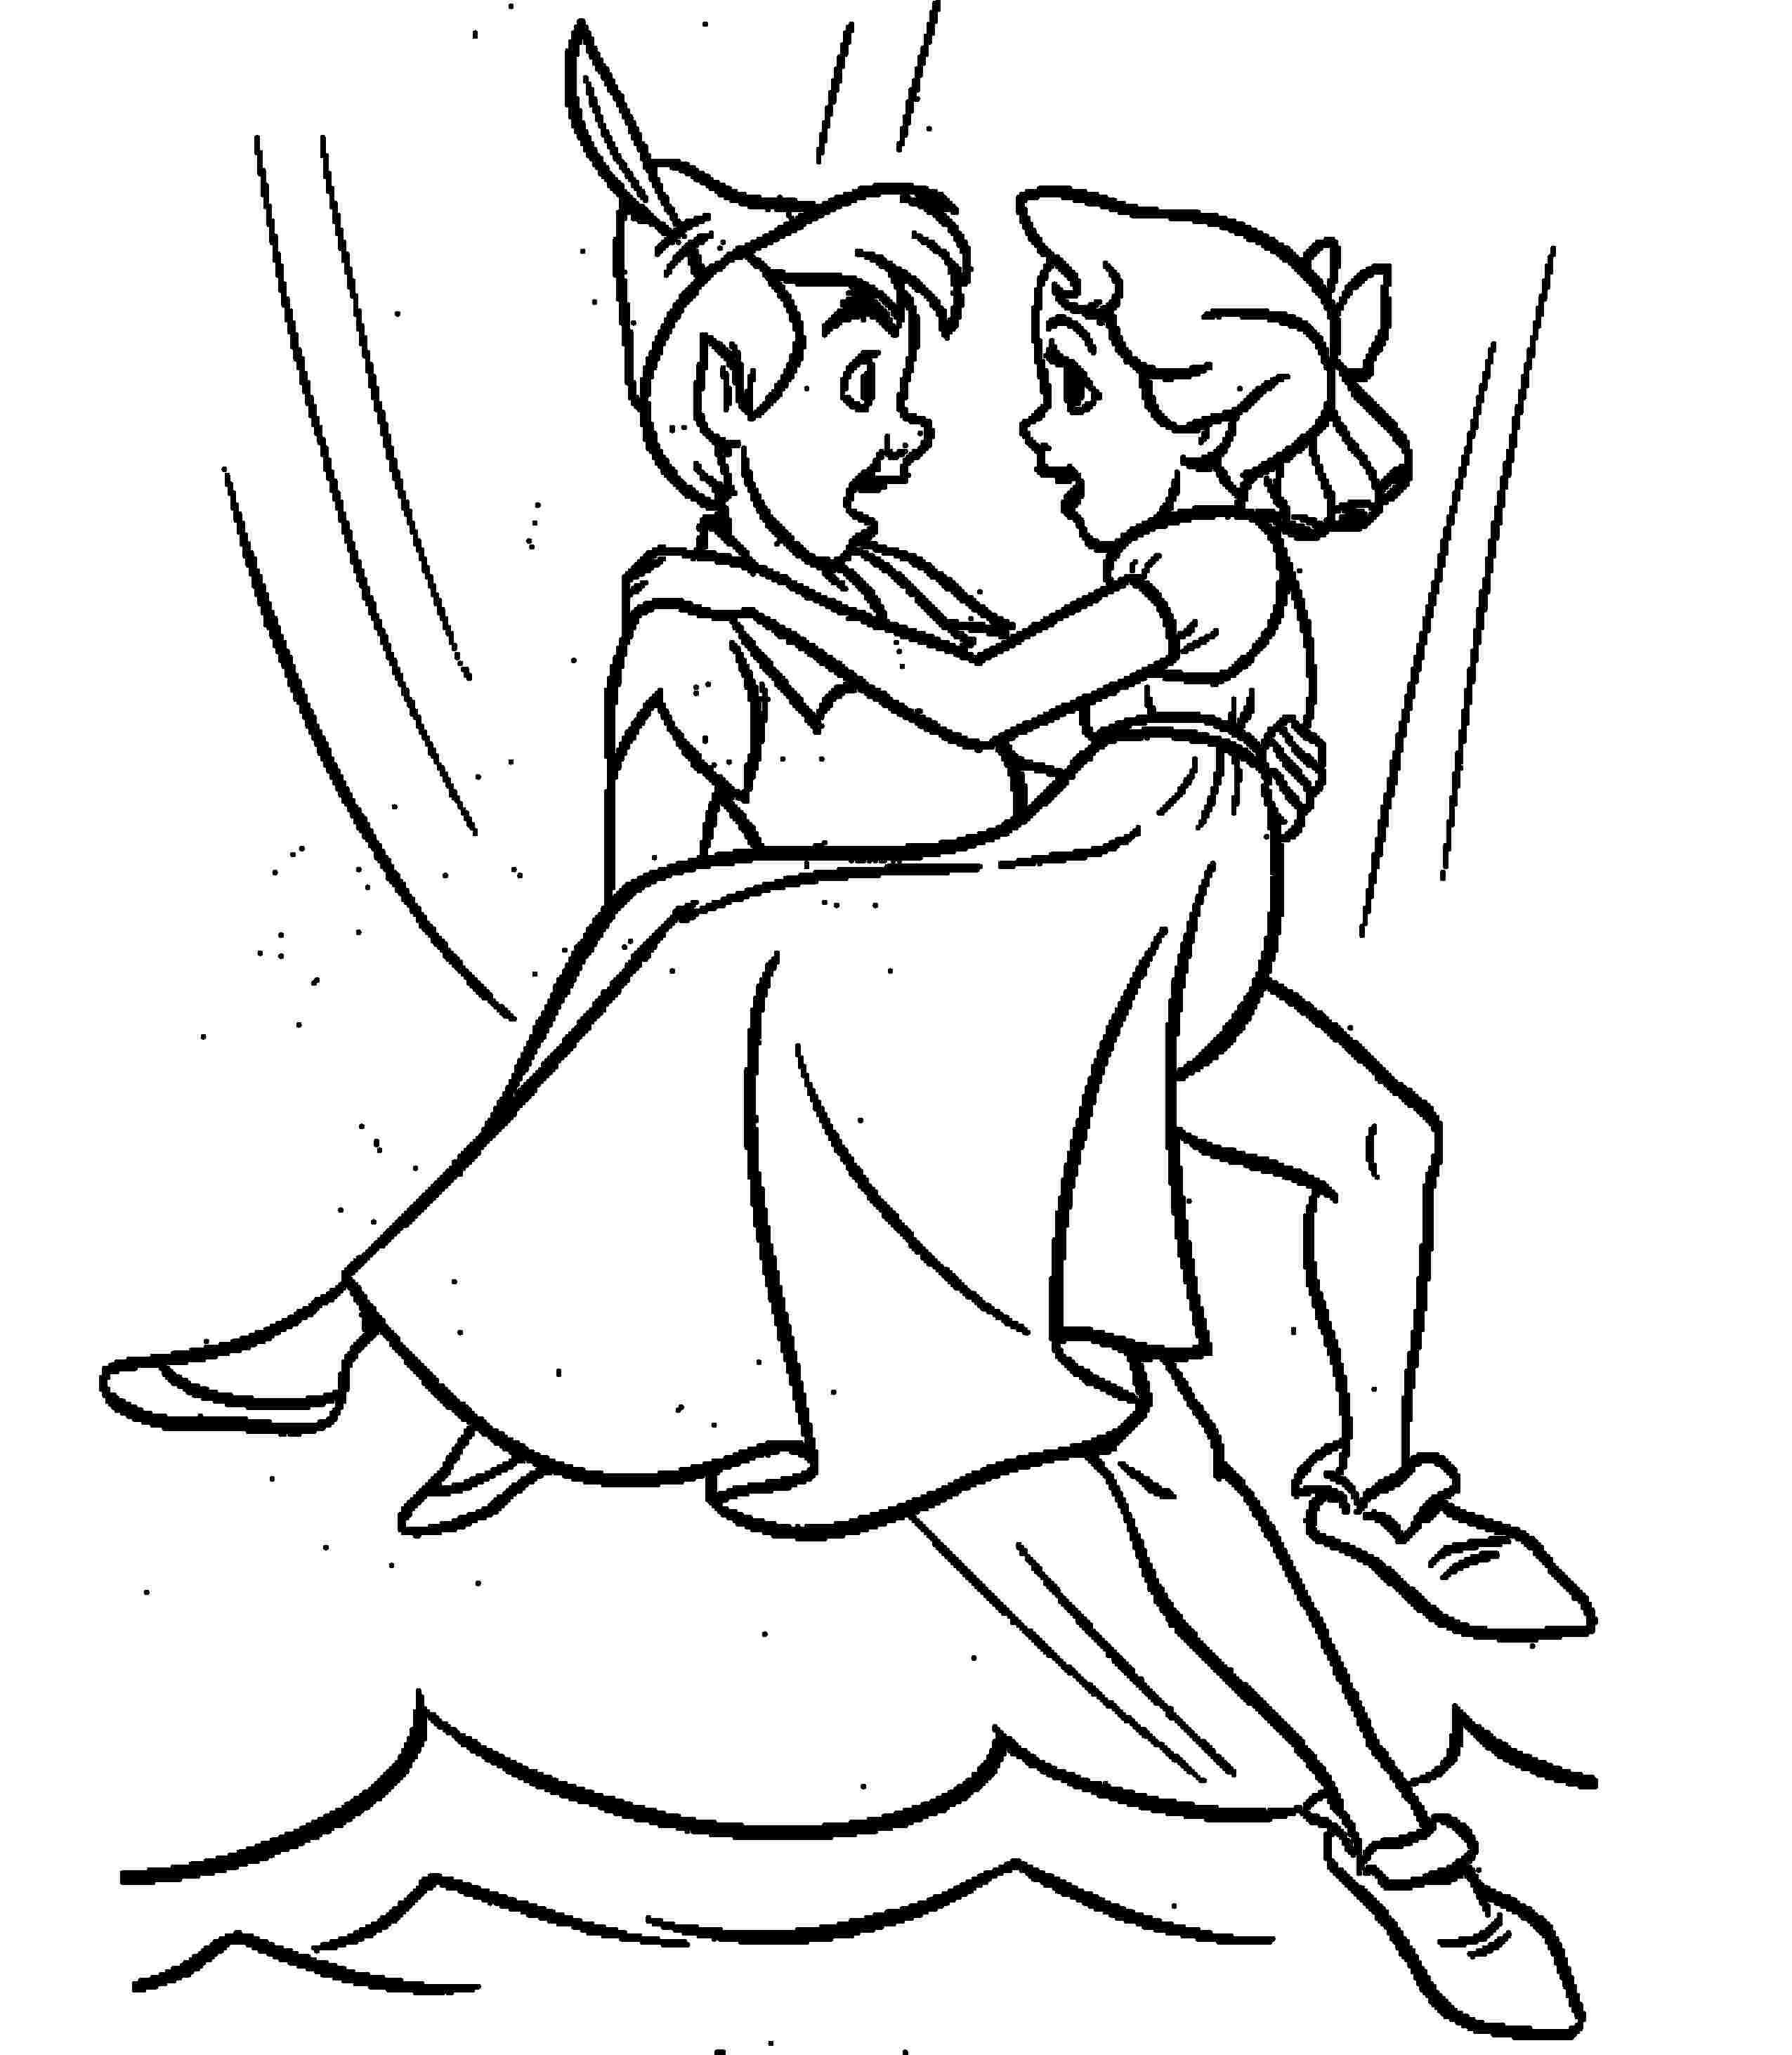 Wendy Coloring Pages at GetColorings.com | Free printable colorings